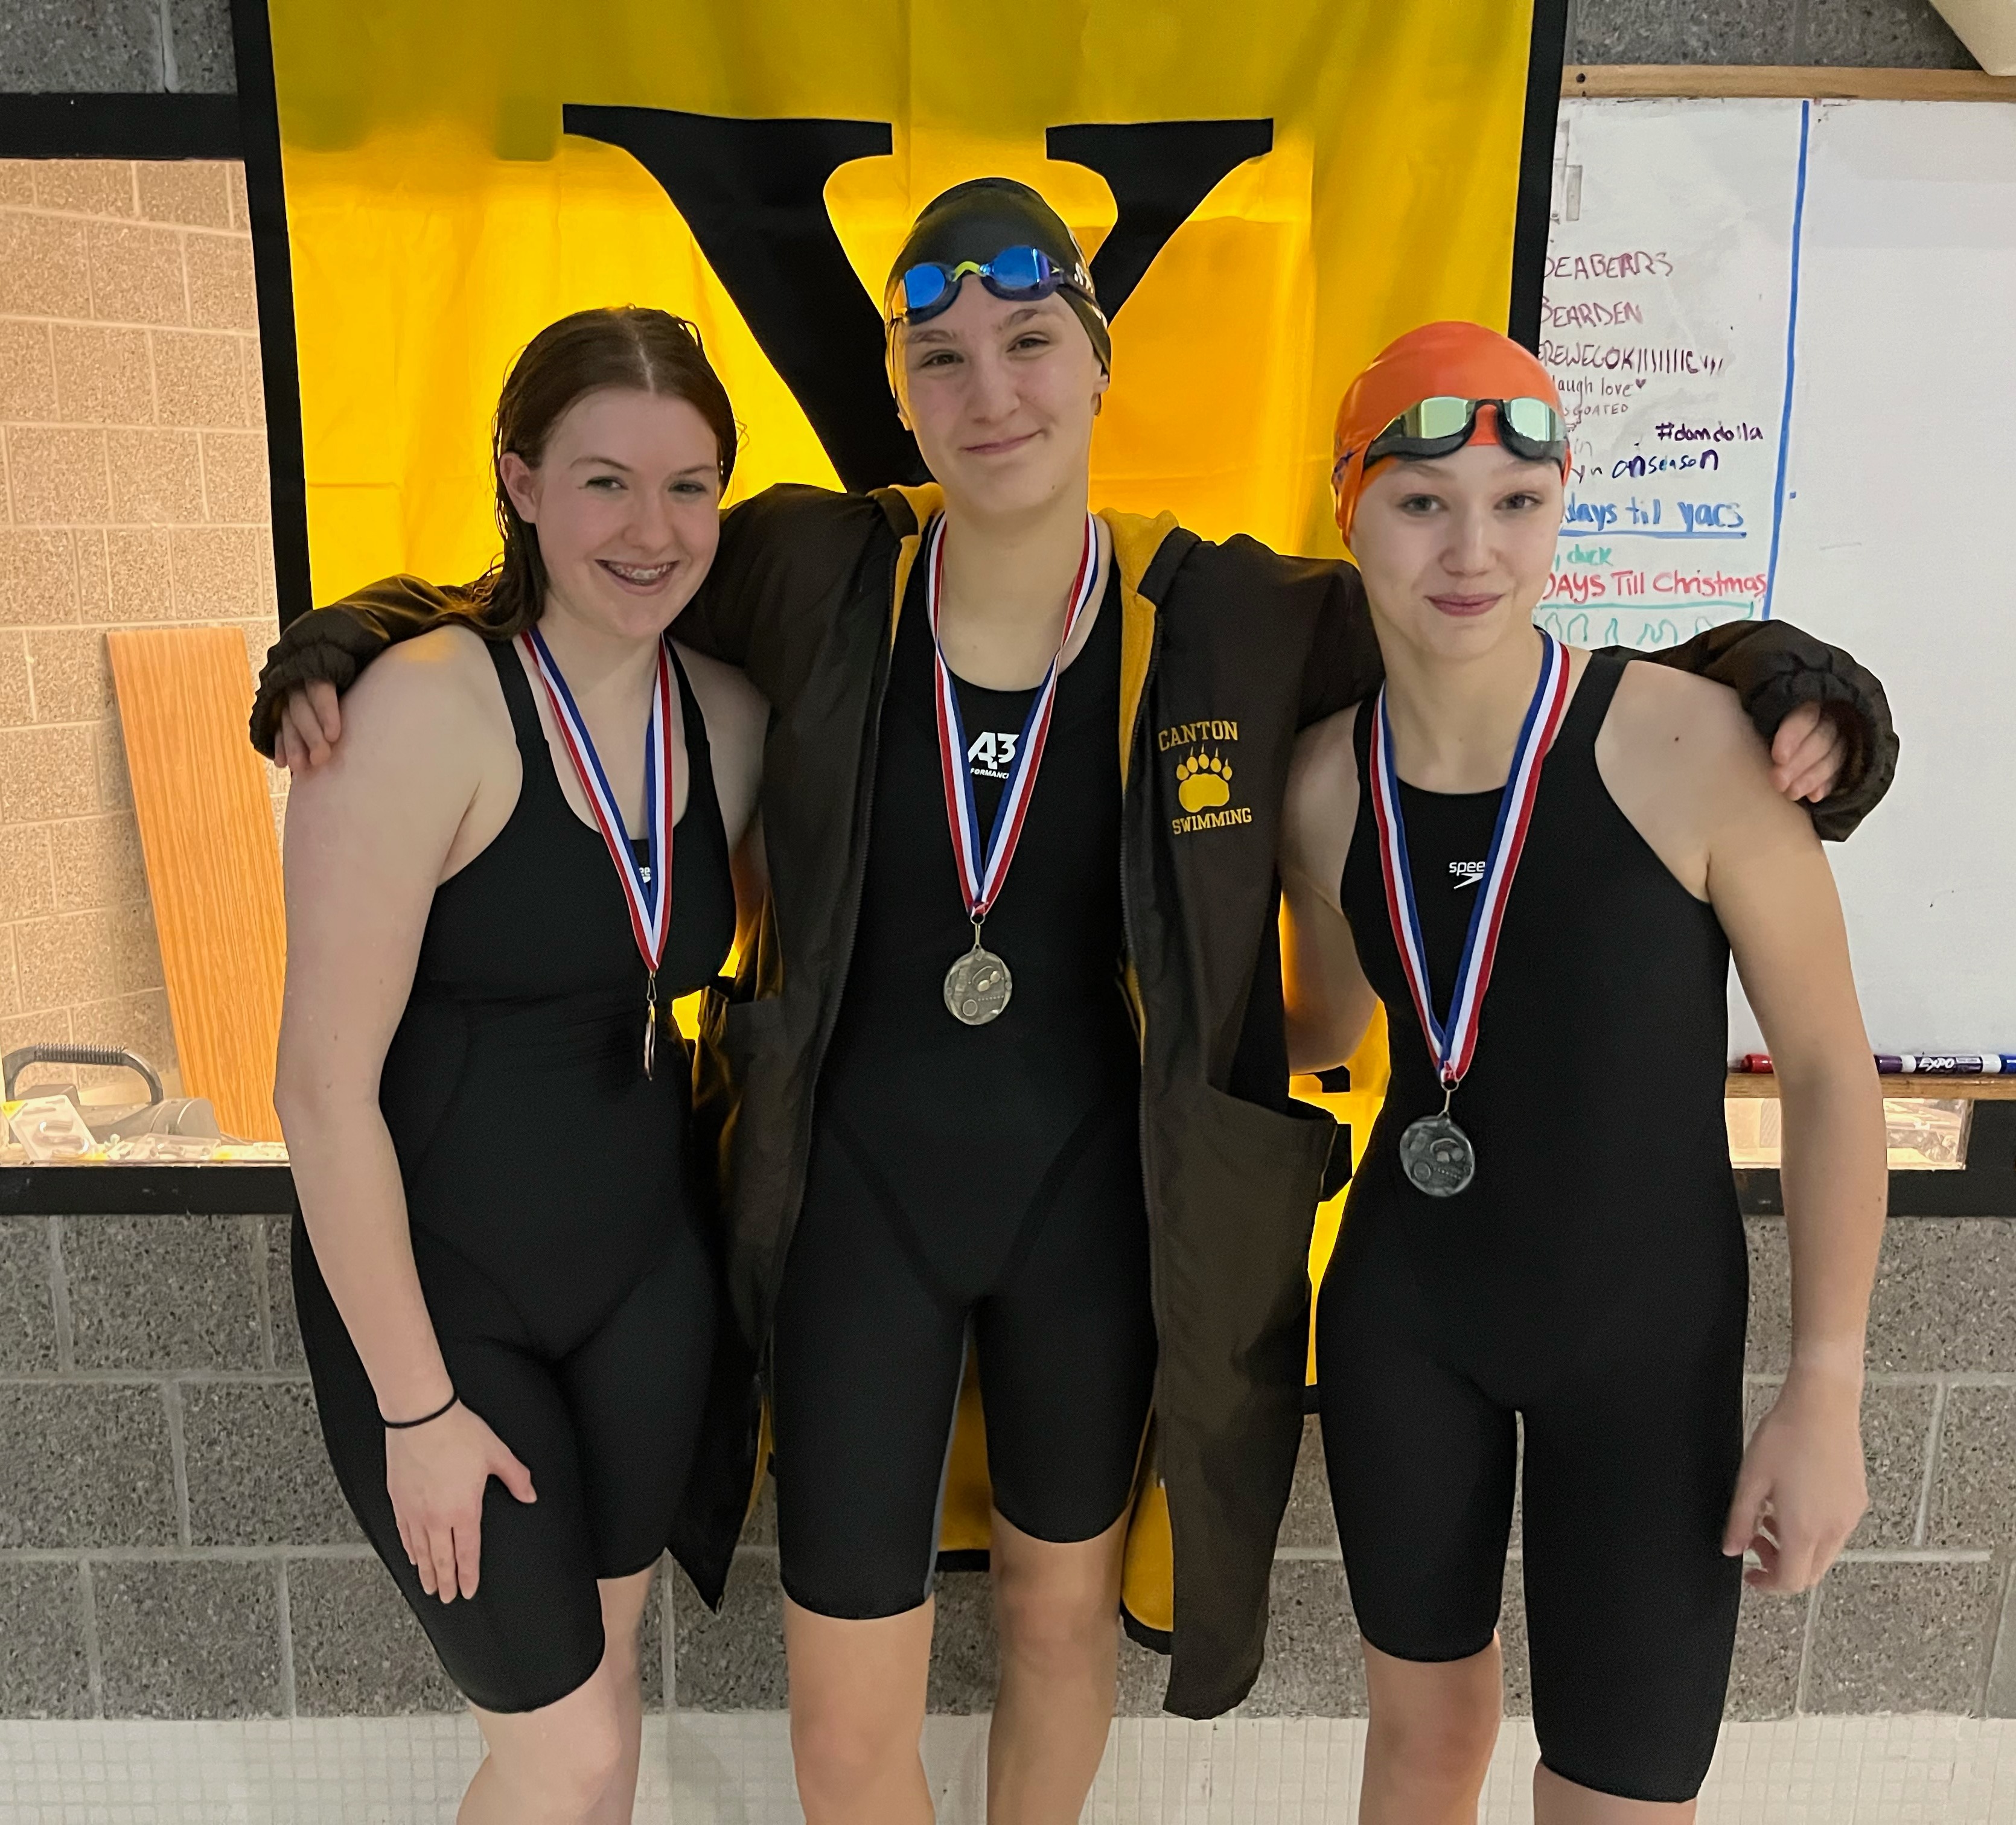 Section 10 3rd Place Winner: OFA Swimming, Taylor Dashnaw in the Backstroke